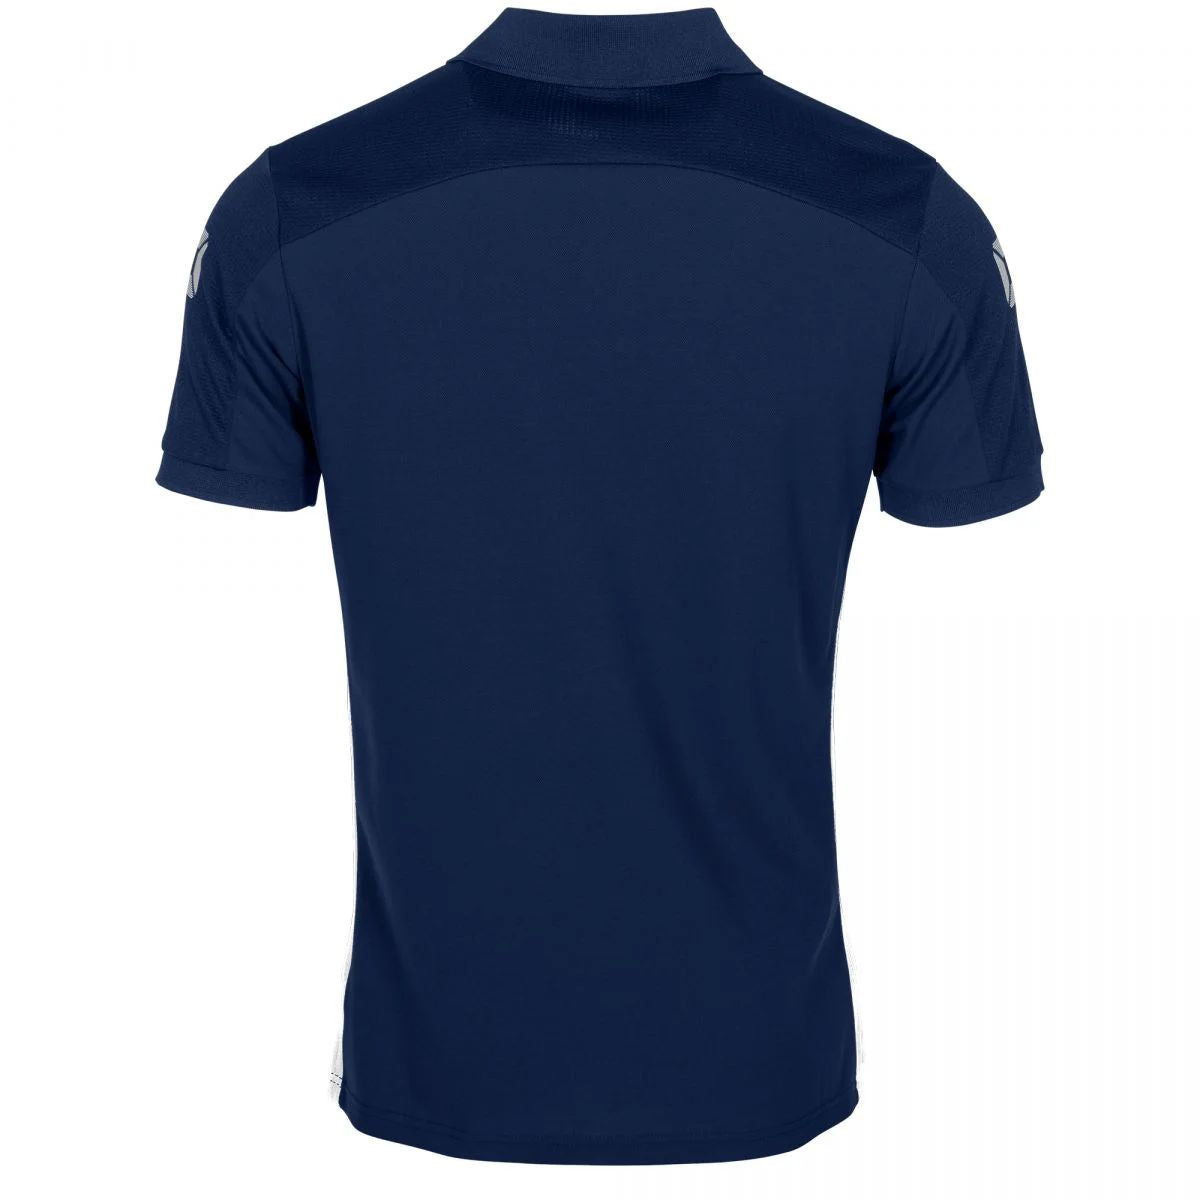 Stanno - Pride Polo - Navy - Adult